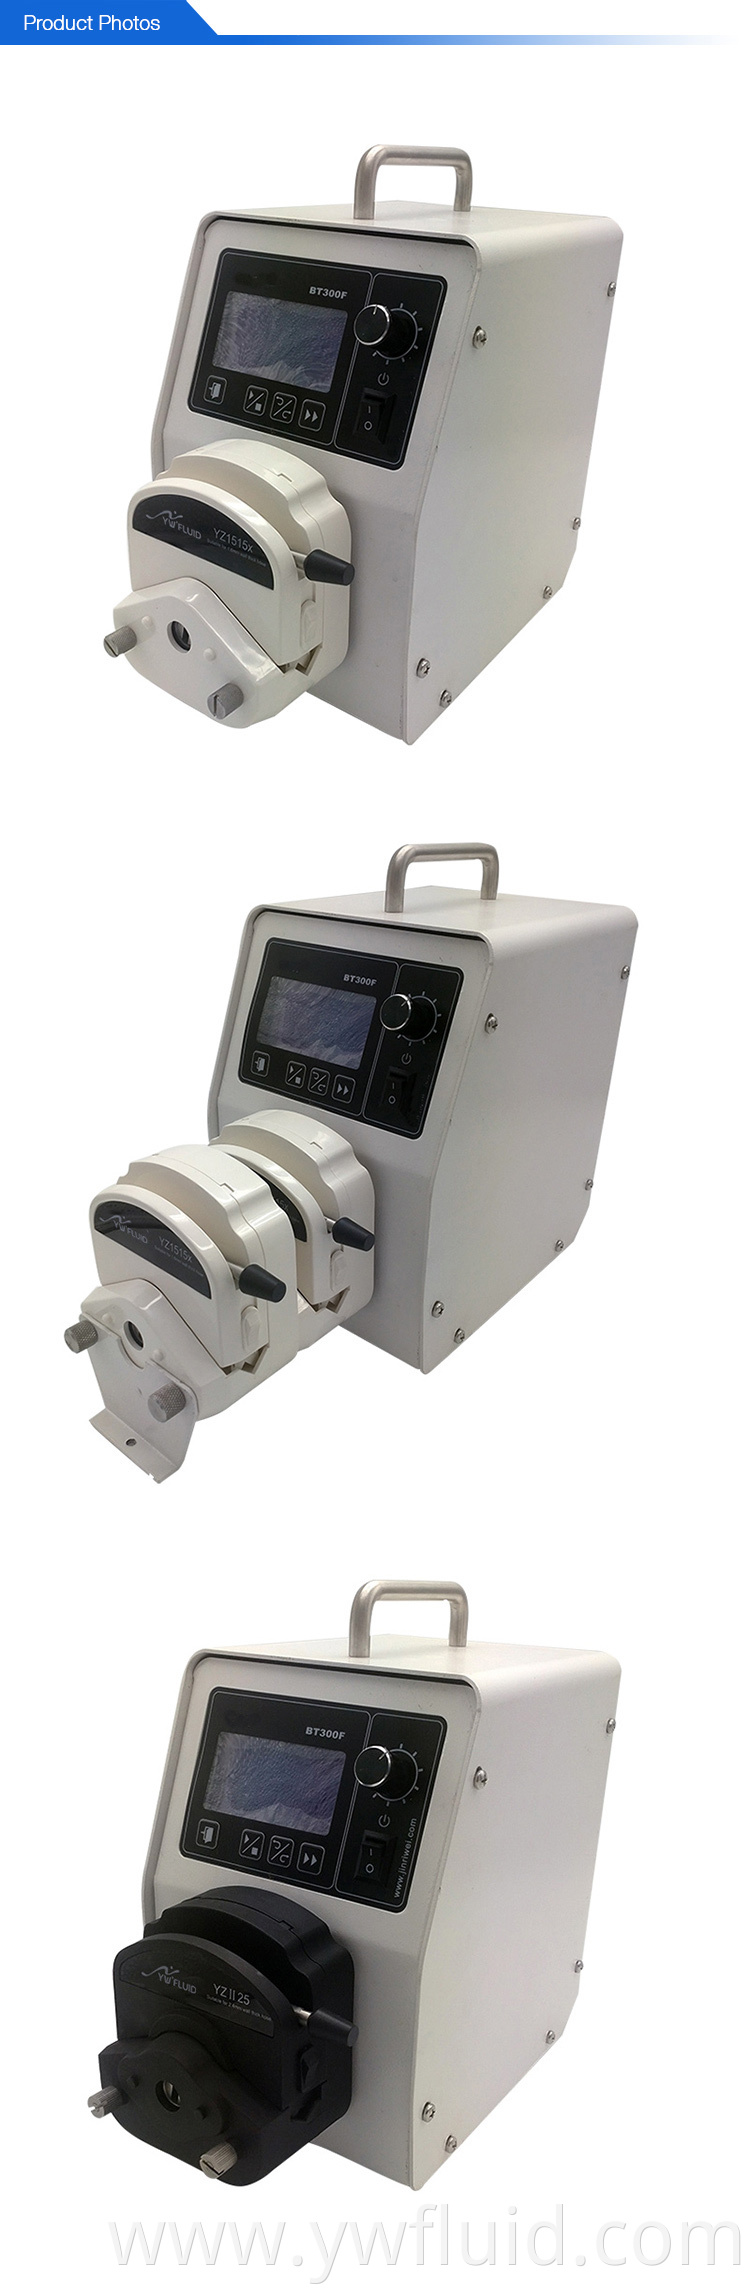 YWfluid Dispensing Peristaltic Pump with AC motor for Laboratory analytical equipment